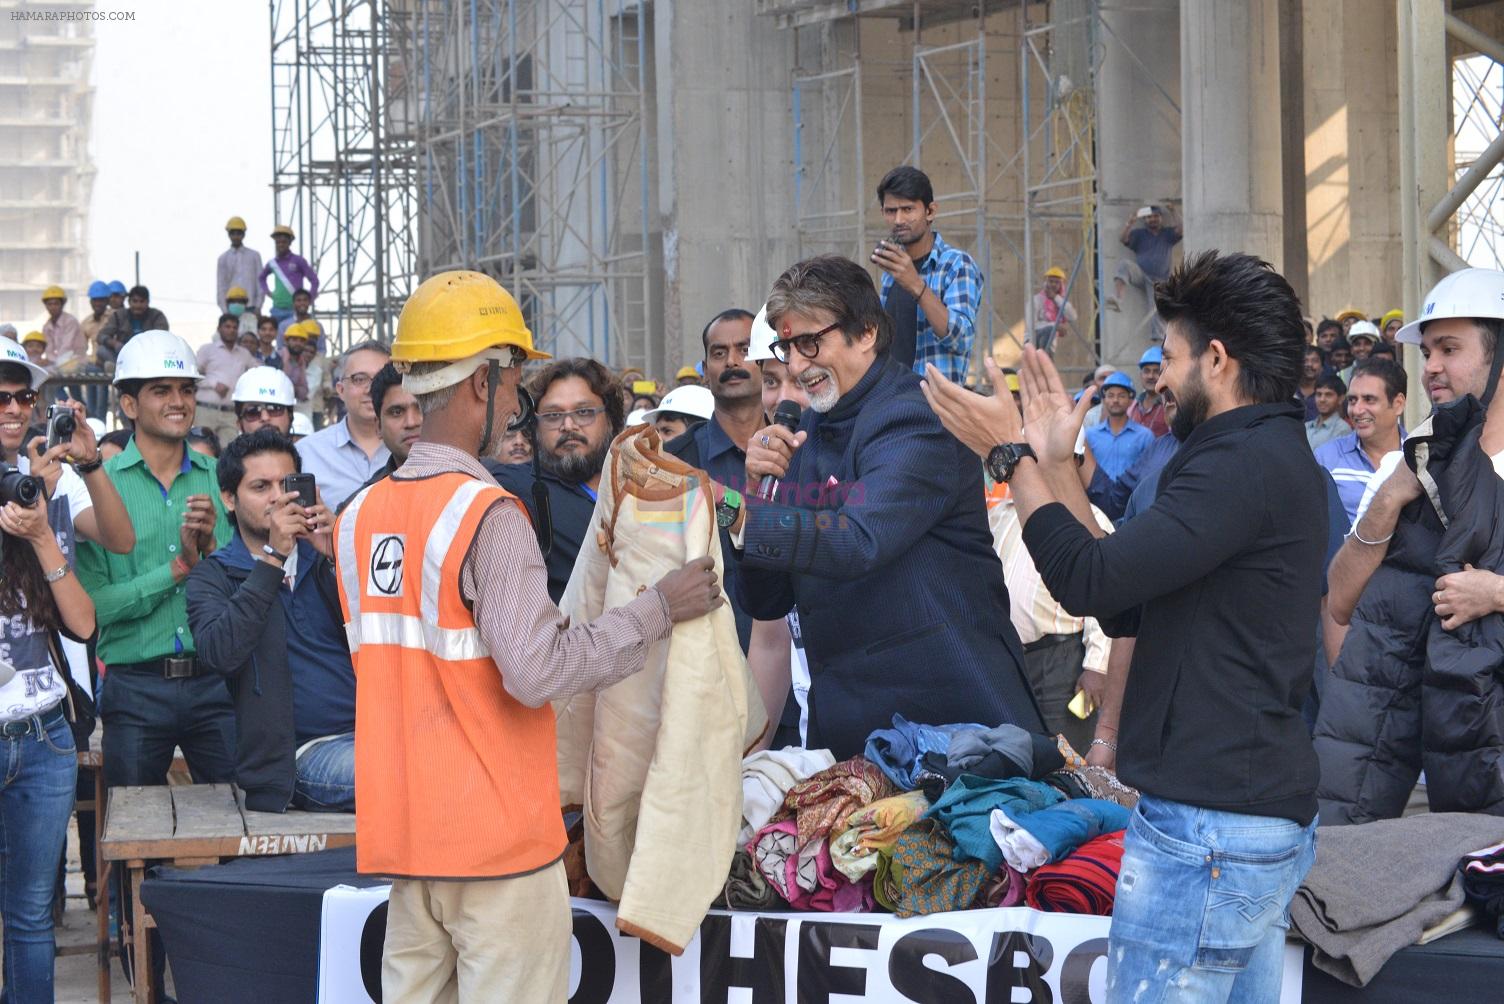 Amitabh Bachchan donating clothes at Gurgaon construction site for Clothes Box Foundation donation